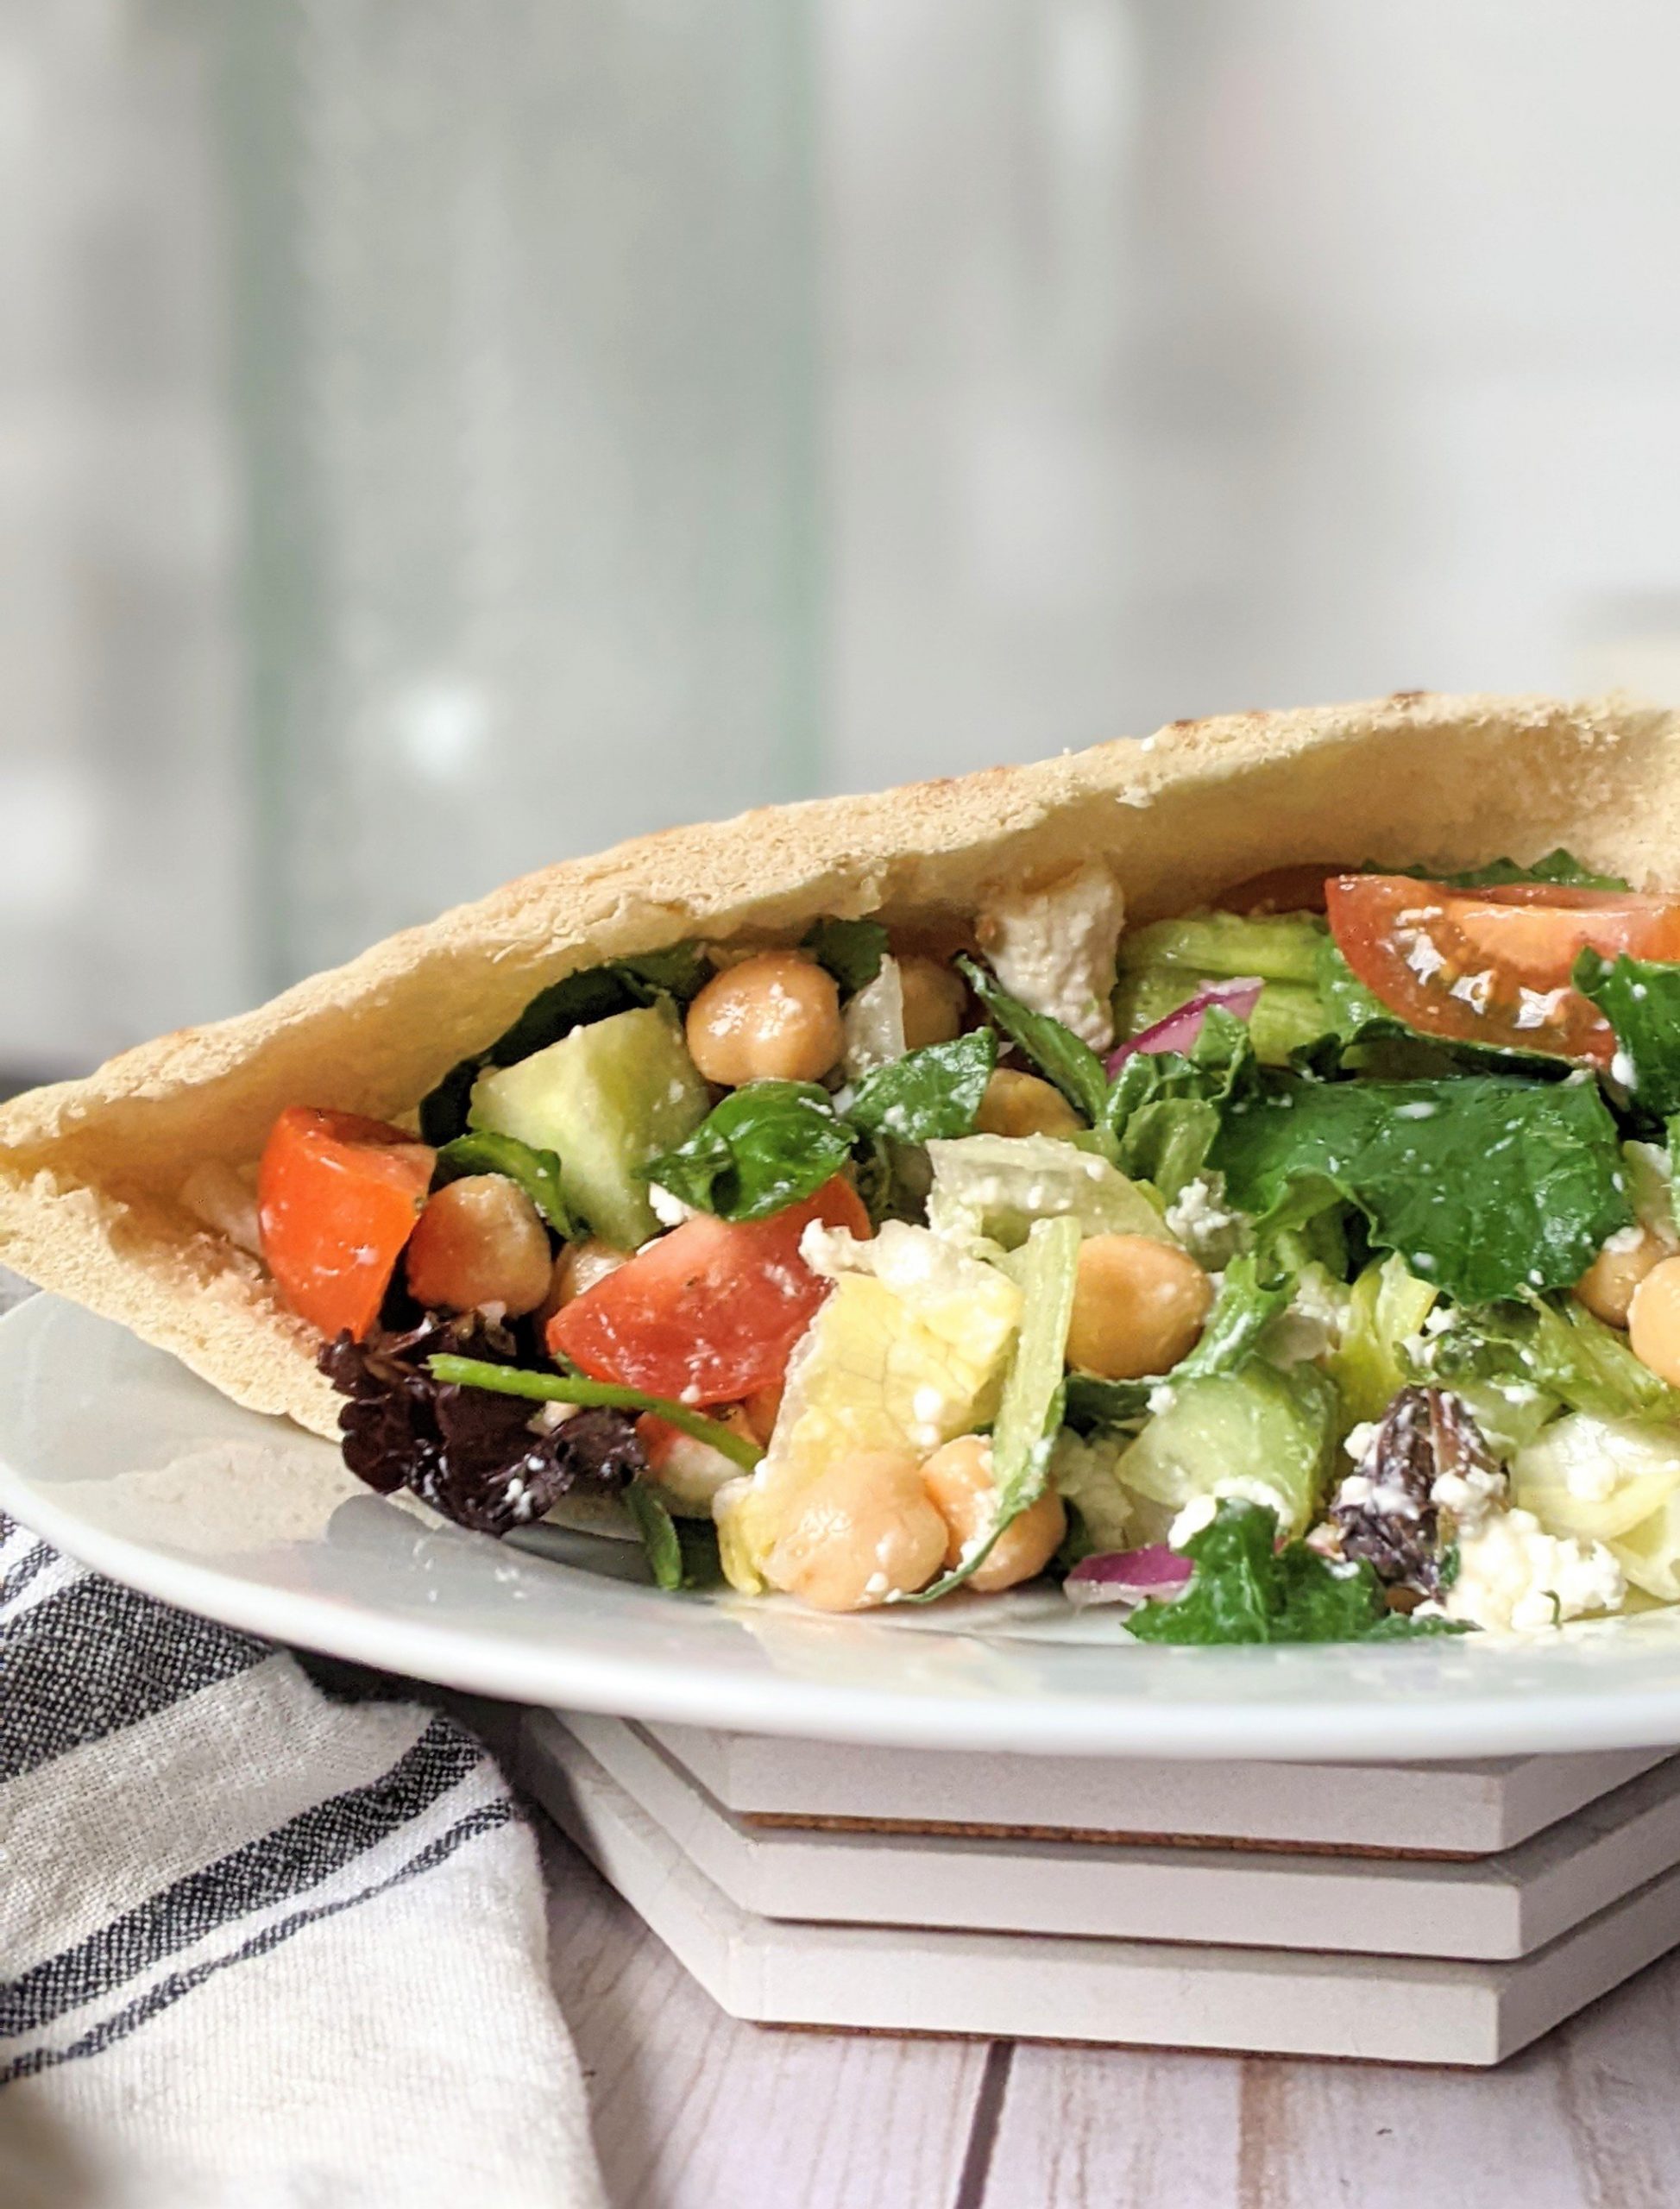 loaded greek salad pita with chickpeas hummus lettuce and tomatoes cucumber wrap in a pita pocket with garlic hummos and garbanzo beans high protein lunch ideas healthy salad wrap recipes